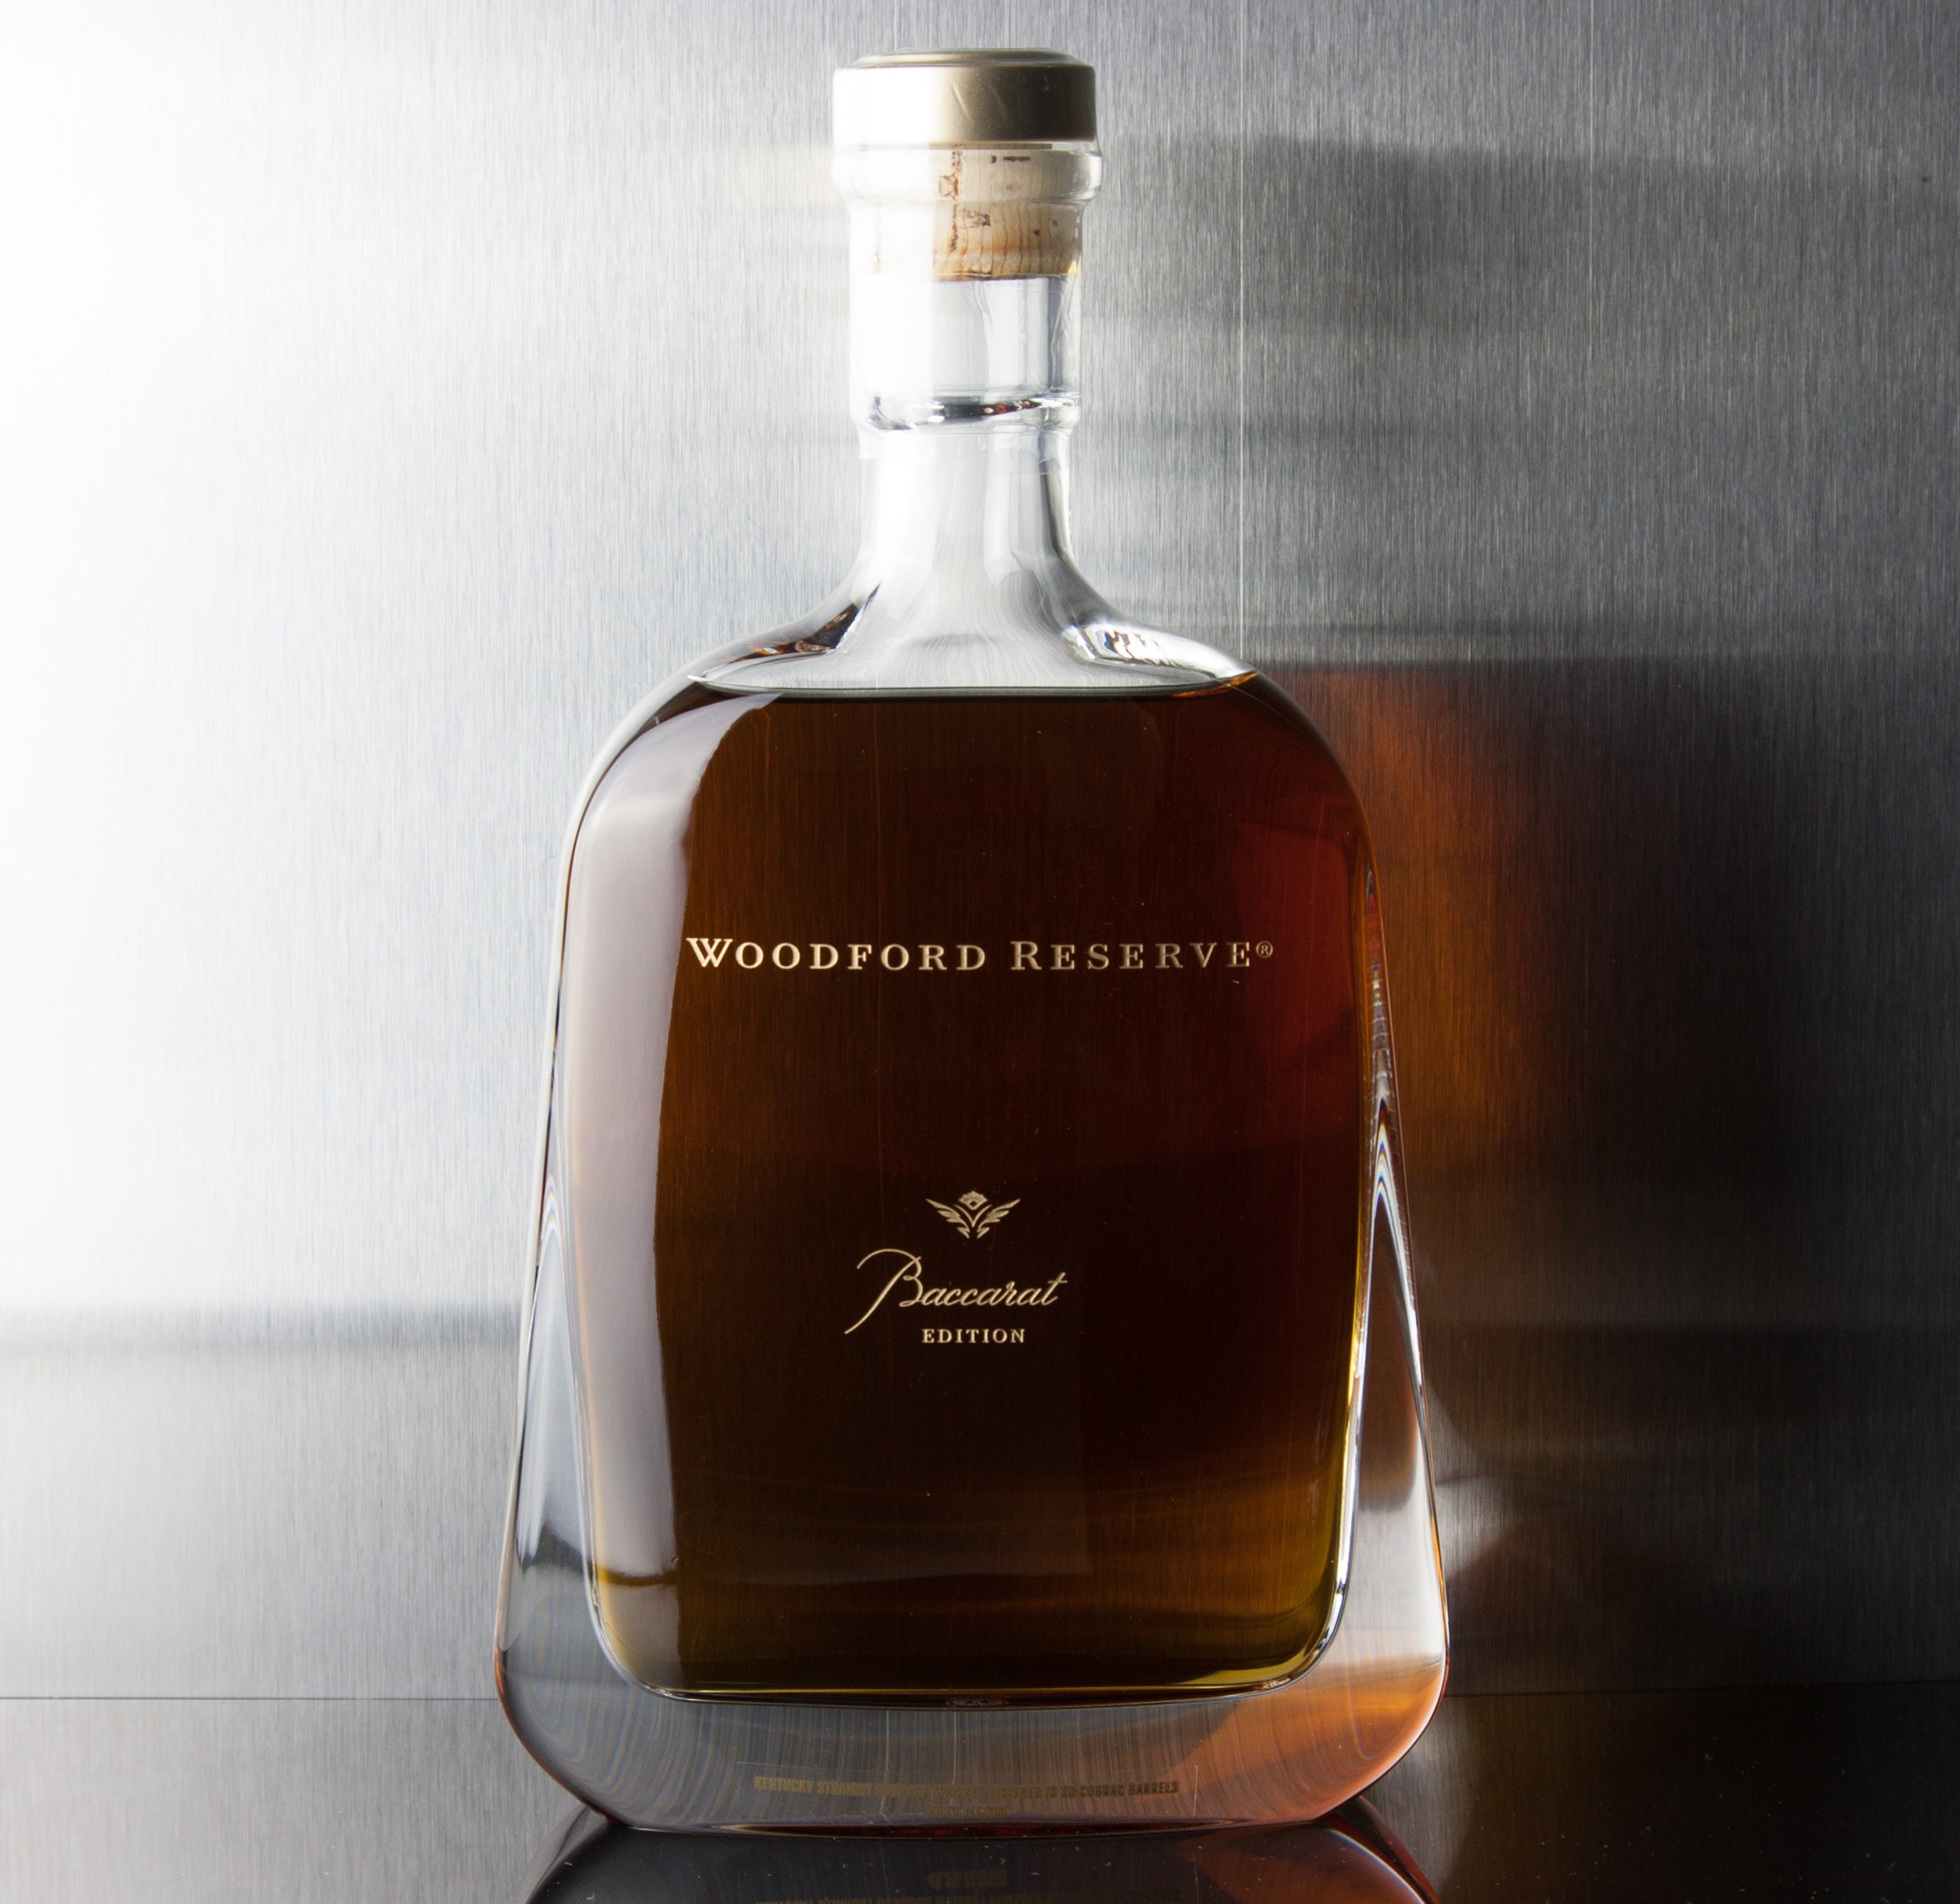 Woodford Reserve Bacarat Edition